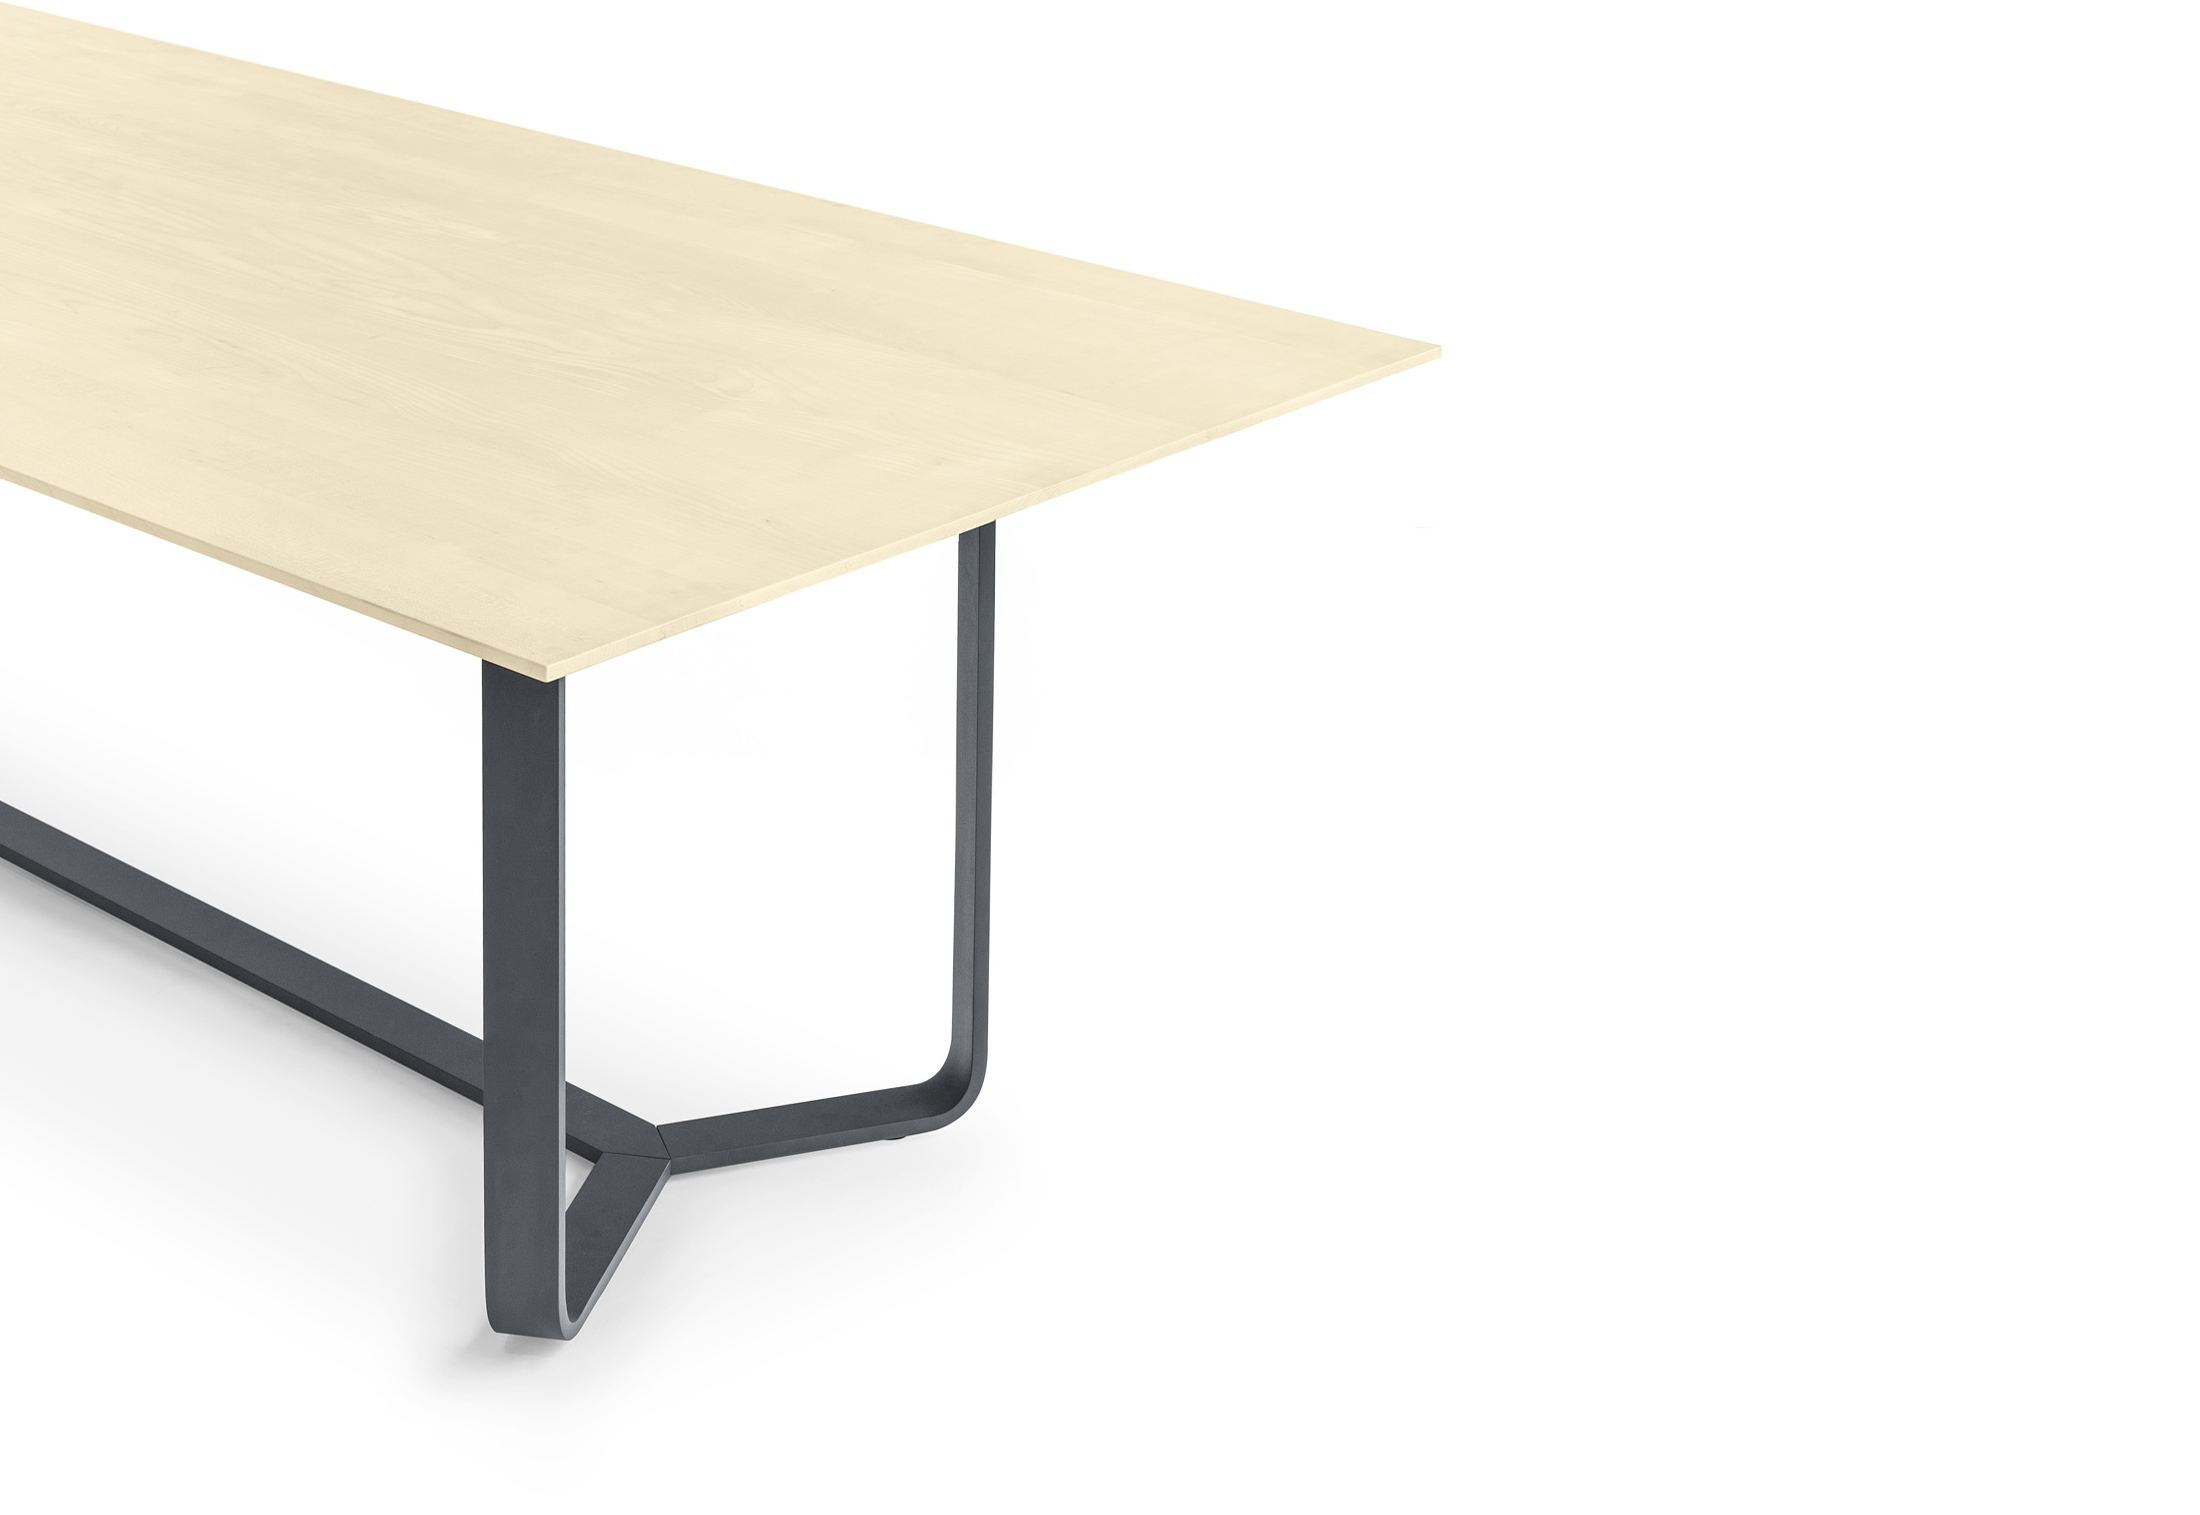 Yoho Dining Table by Stefan Westmeyer for Girsberger